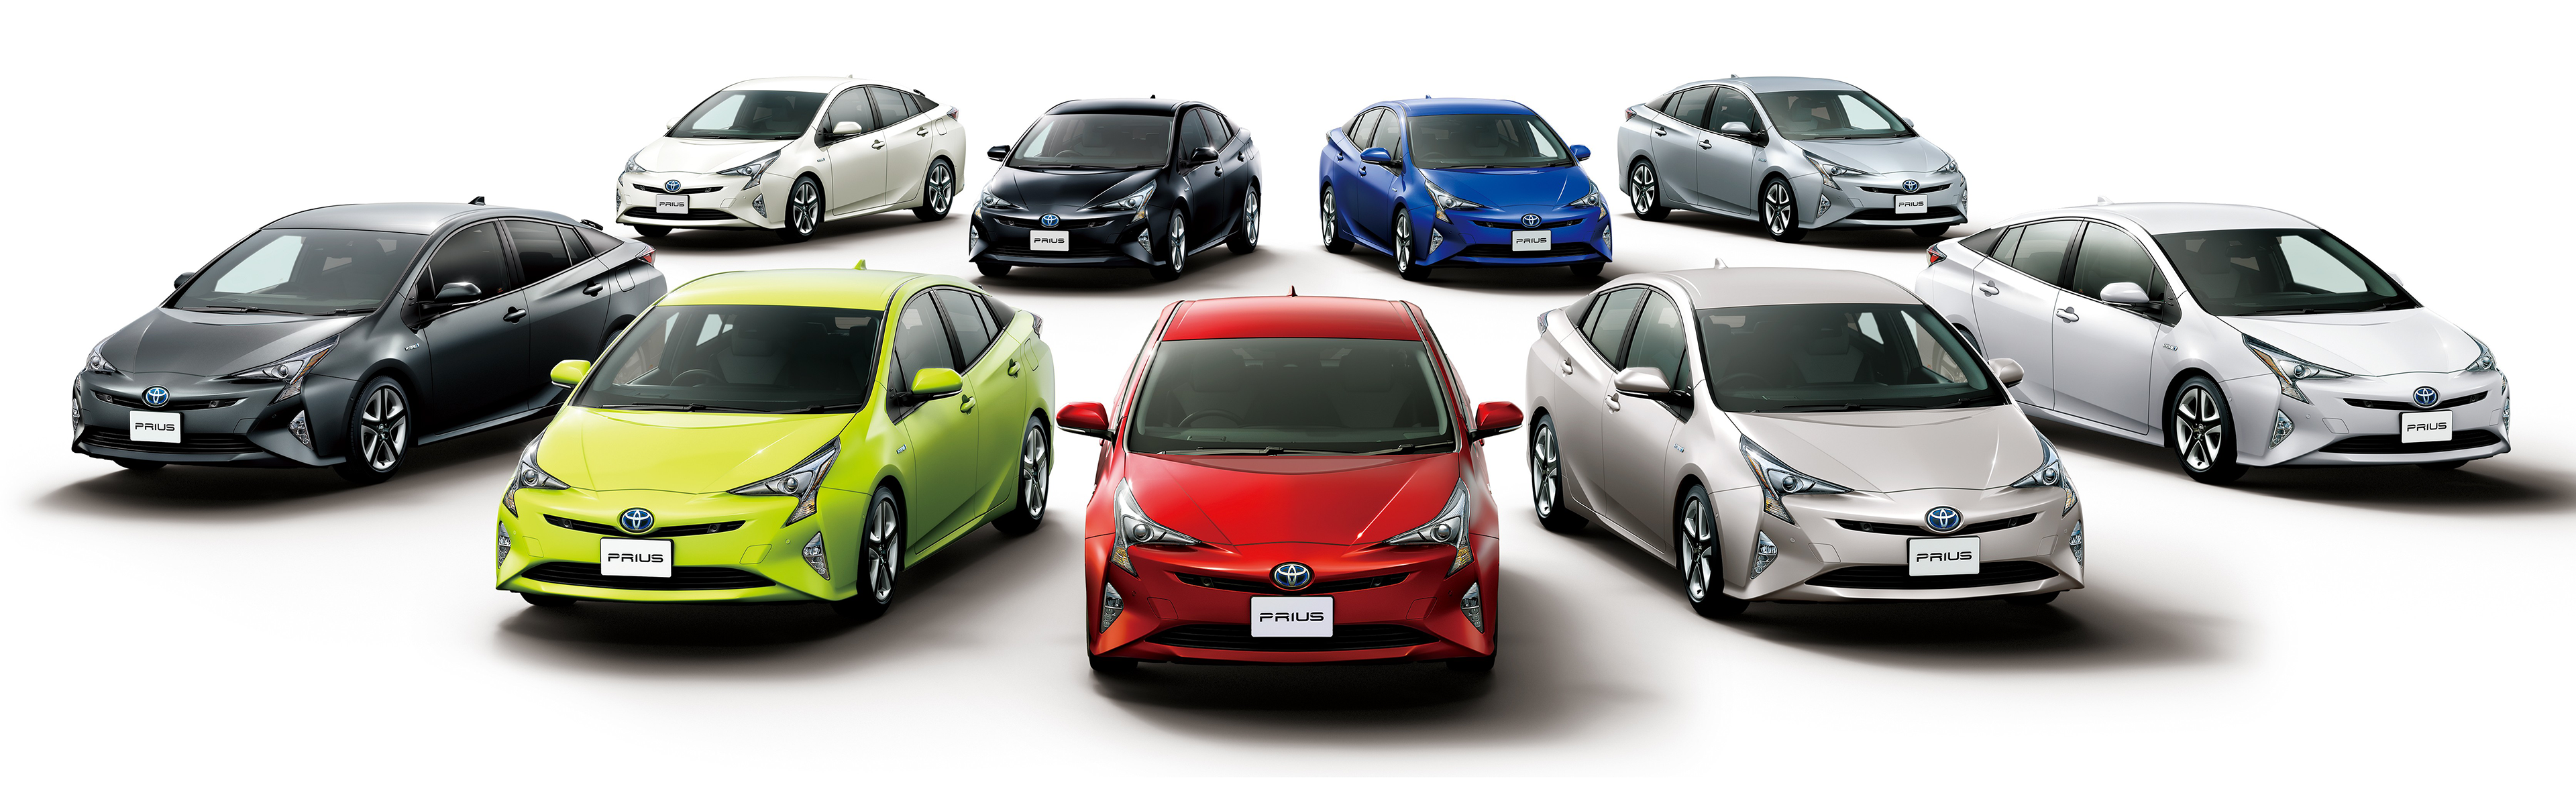 Toyota Prius Car Vehicle Electric Car Dual Monitors Multiple Display Simple Background 3840x1200